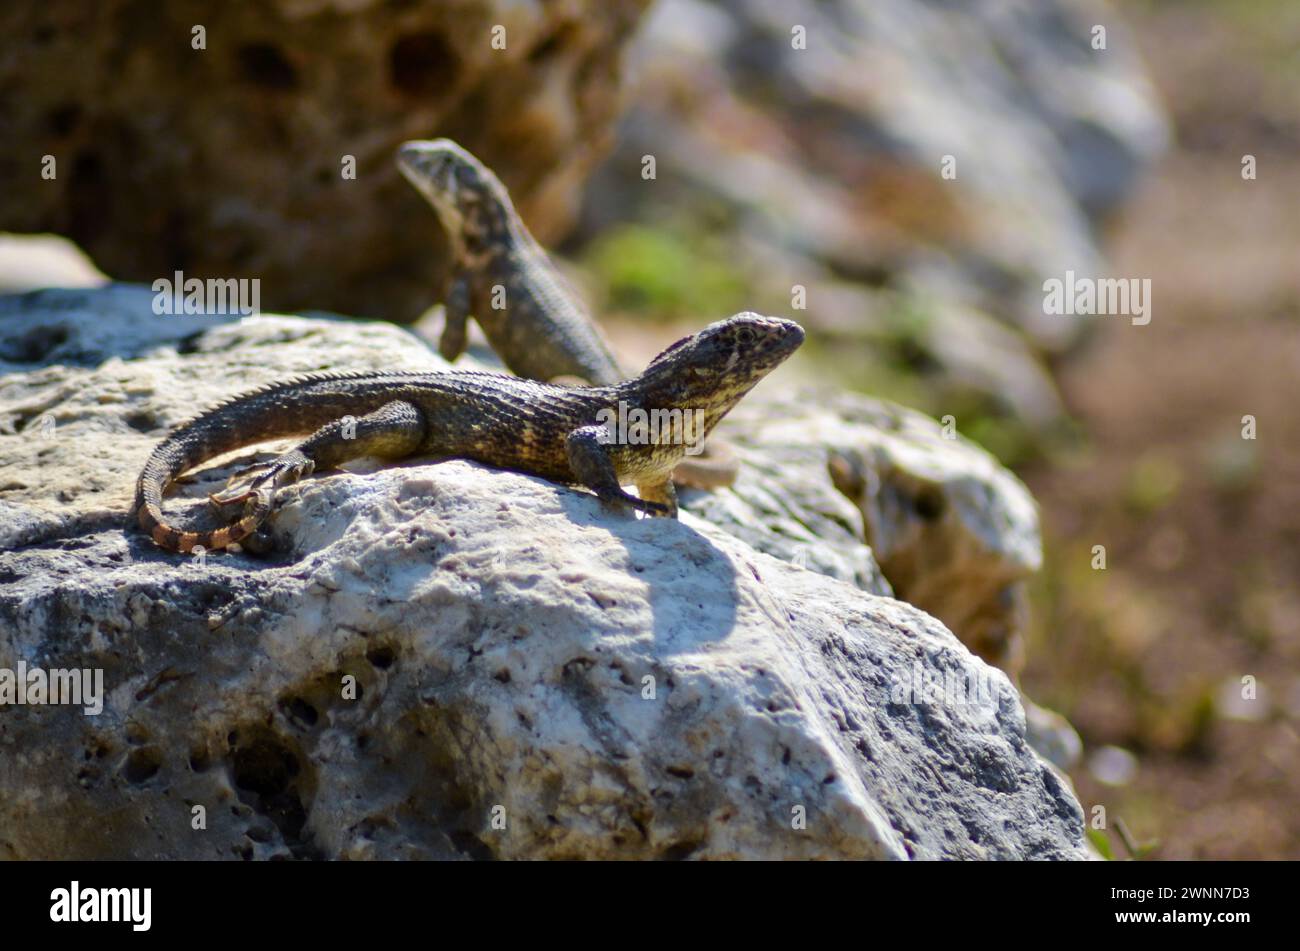 2 curly lizards on a Lava rock, with 1 lizard closeup and the other lizard blurred in the background. Stock Photo